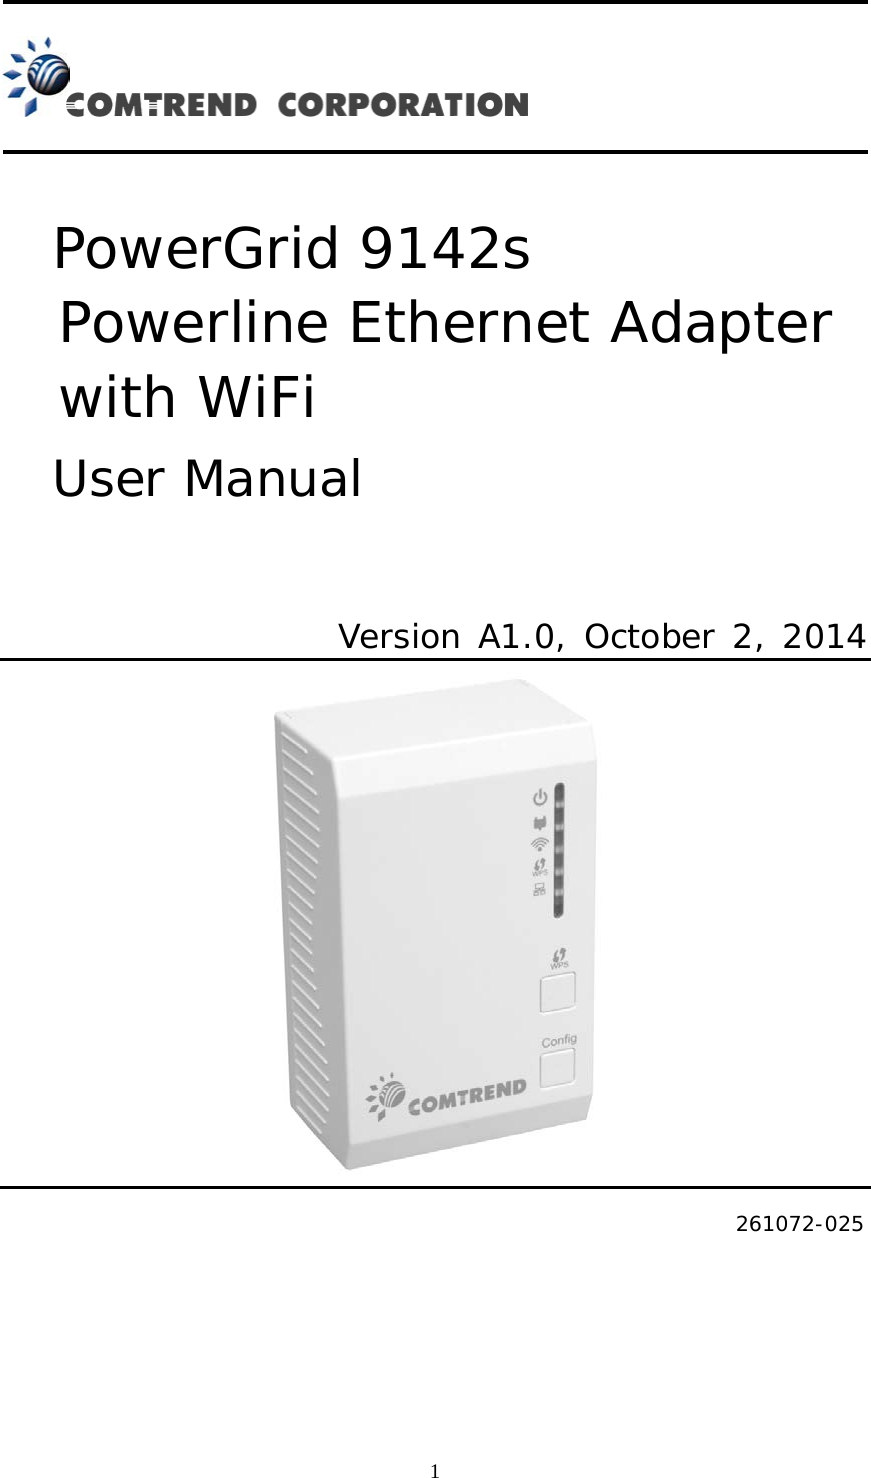 1    PowerGrid 9142s    Powerline Ethernet Adapter   with WiFi   User Manual    Version A1.0, October 2, 2014      261072-025 